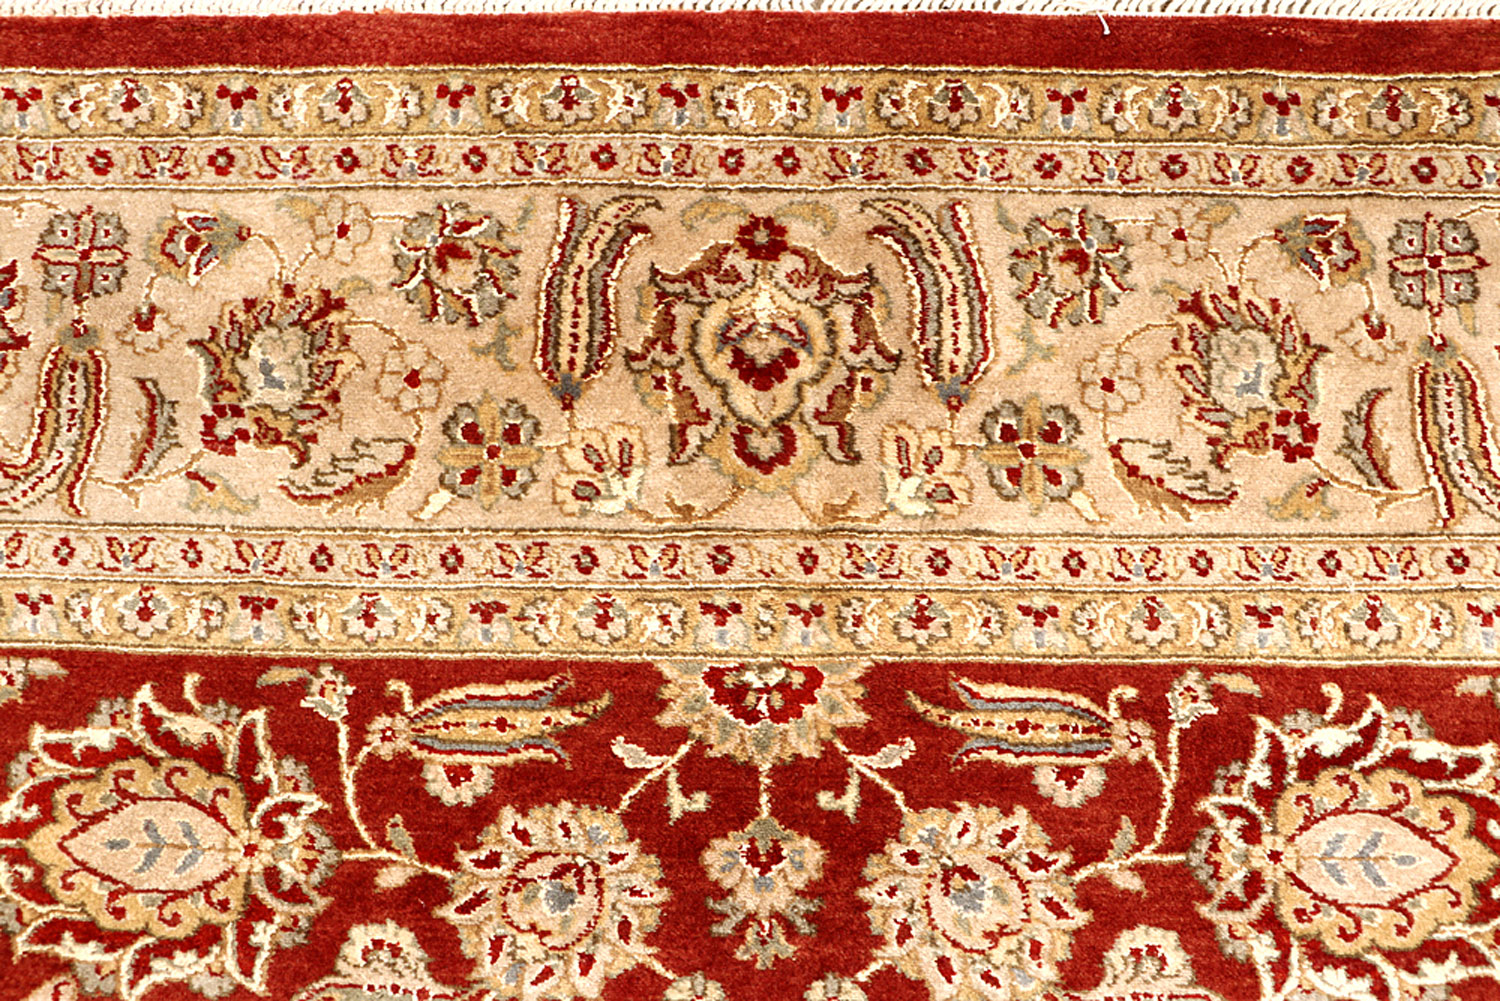 San Diego Rug Cleaning And Repair